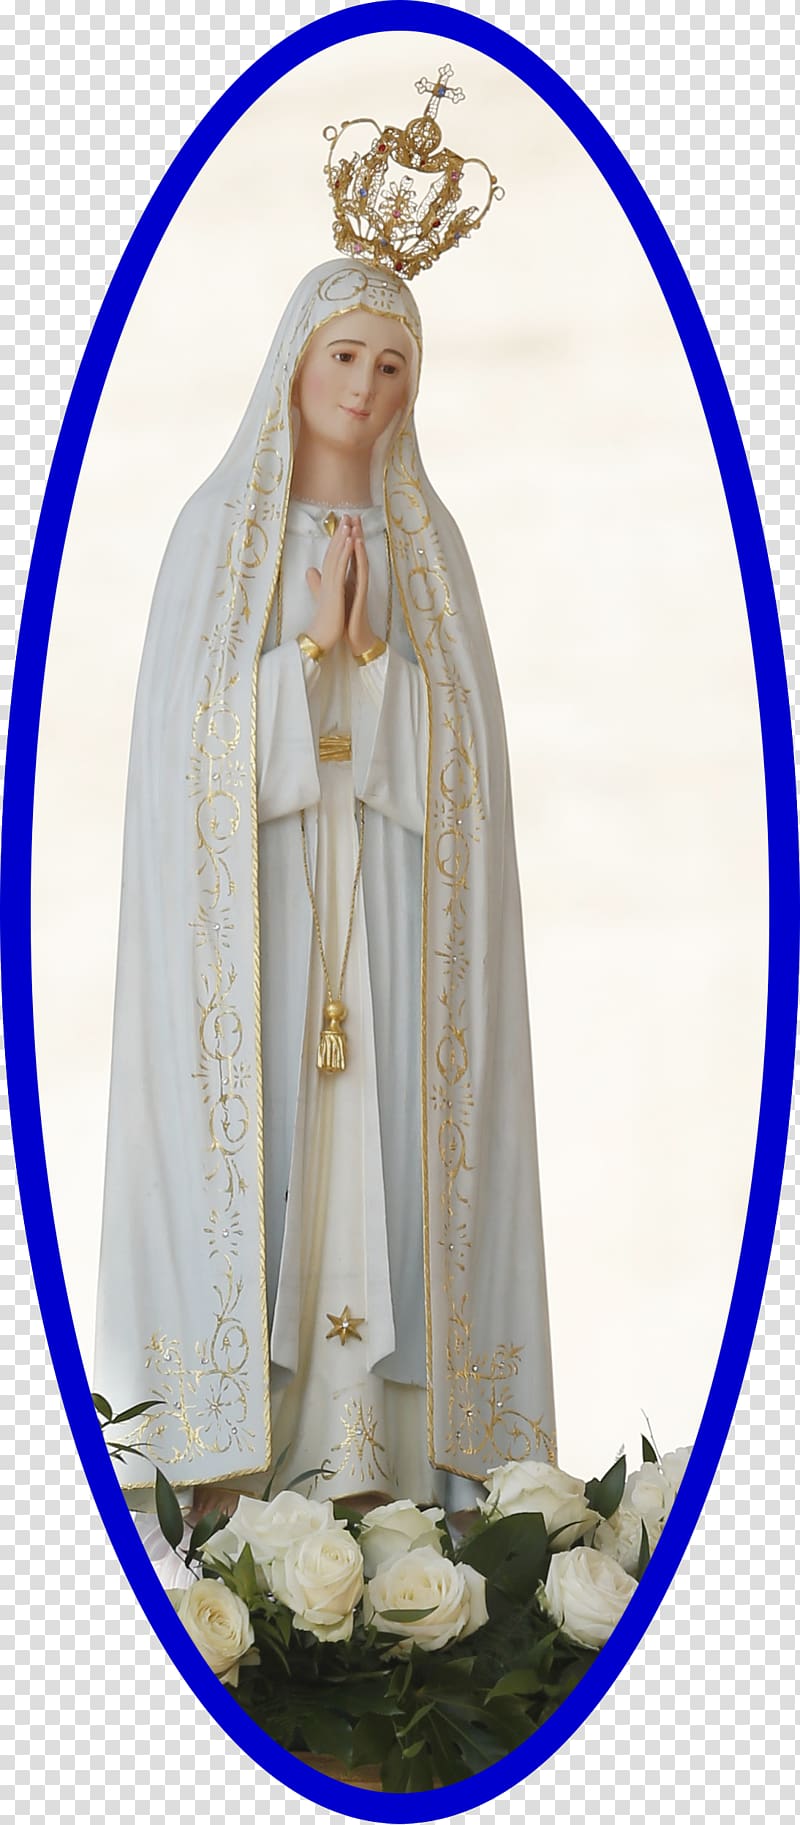 Mary Sanctuary of Fátima Our Lady of Fátima Apparitions of Our Lady of Fatima Aita santu, Mary transparent background PNG clipart